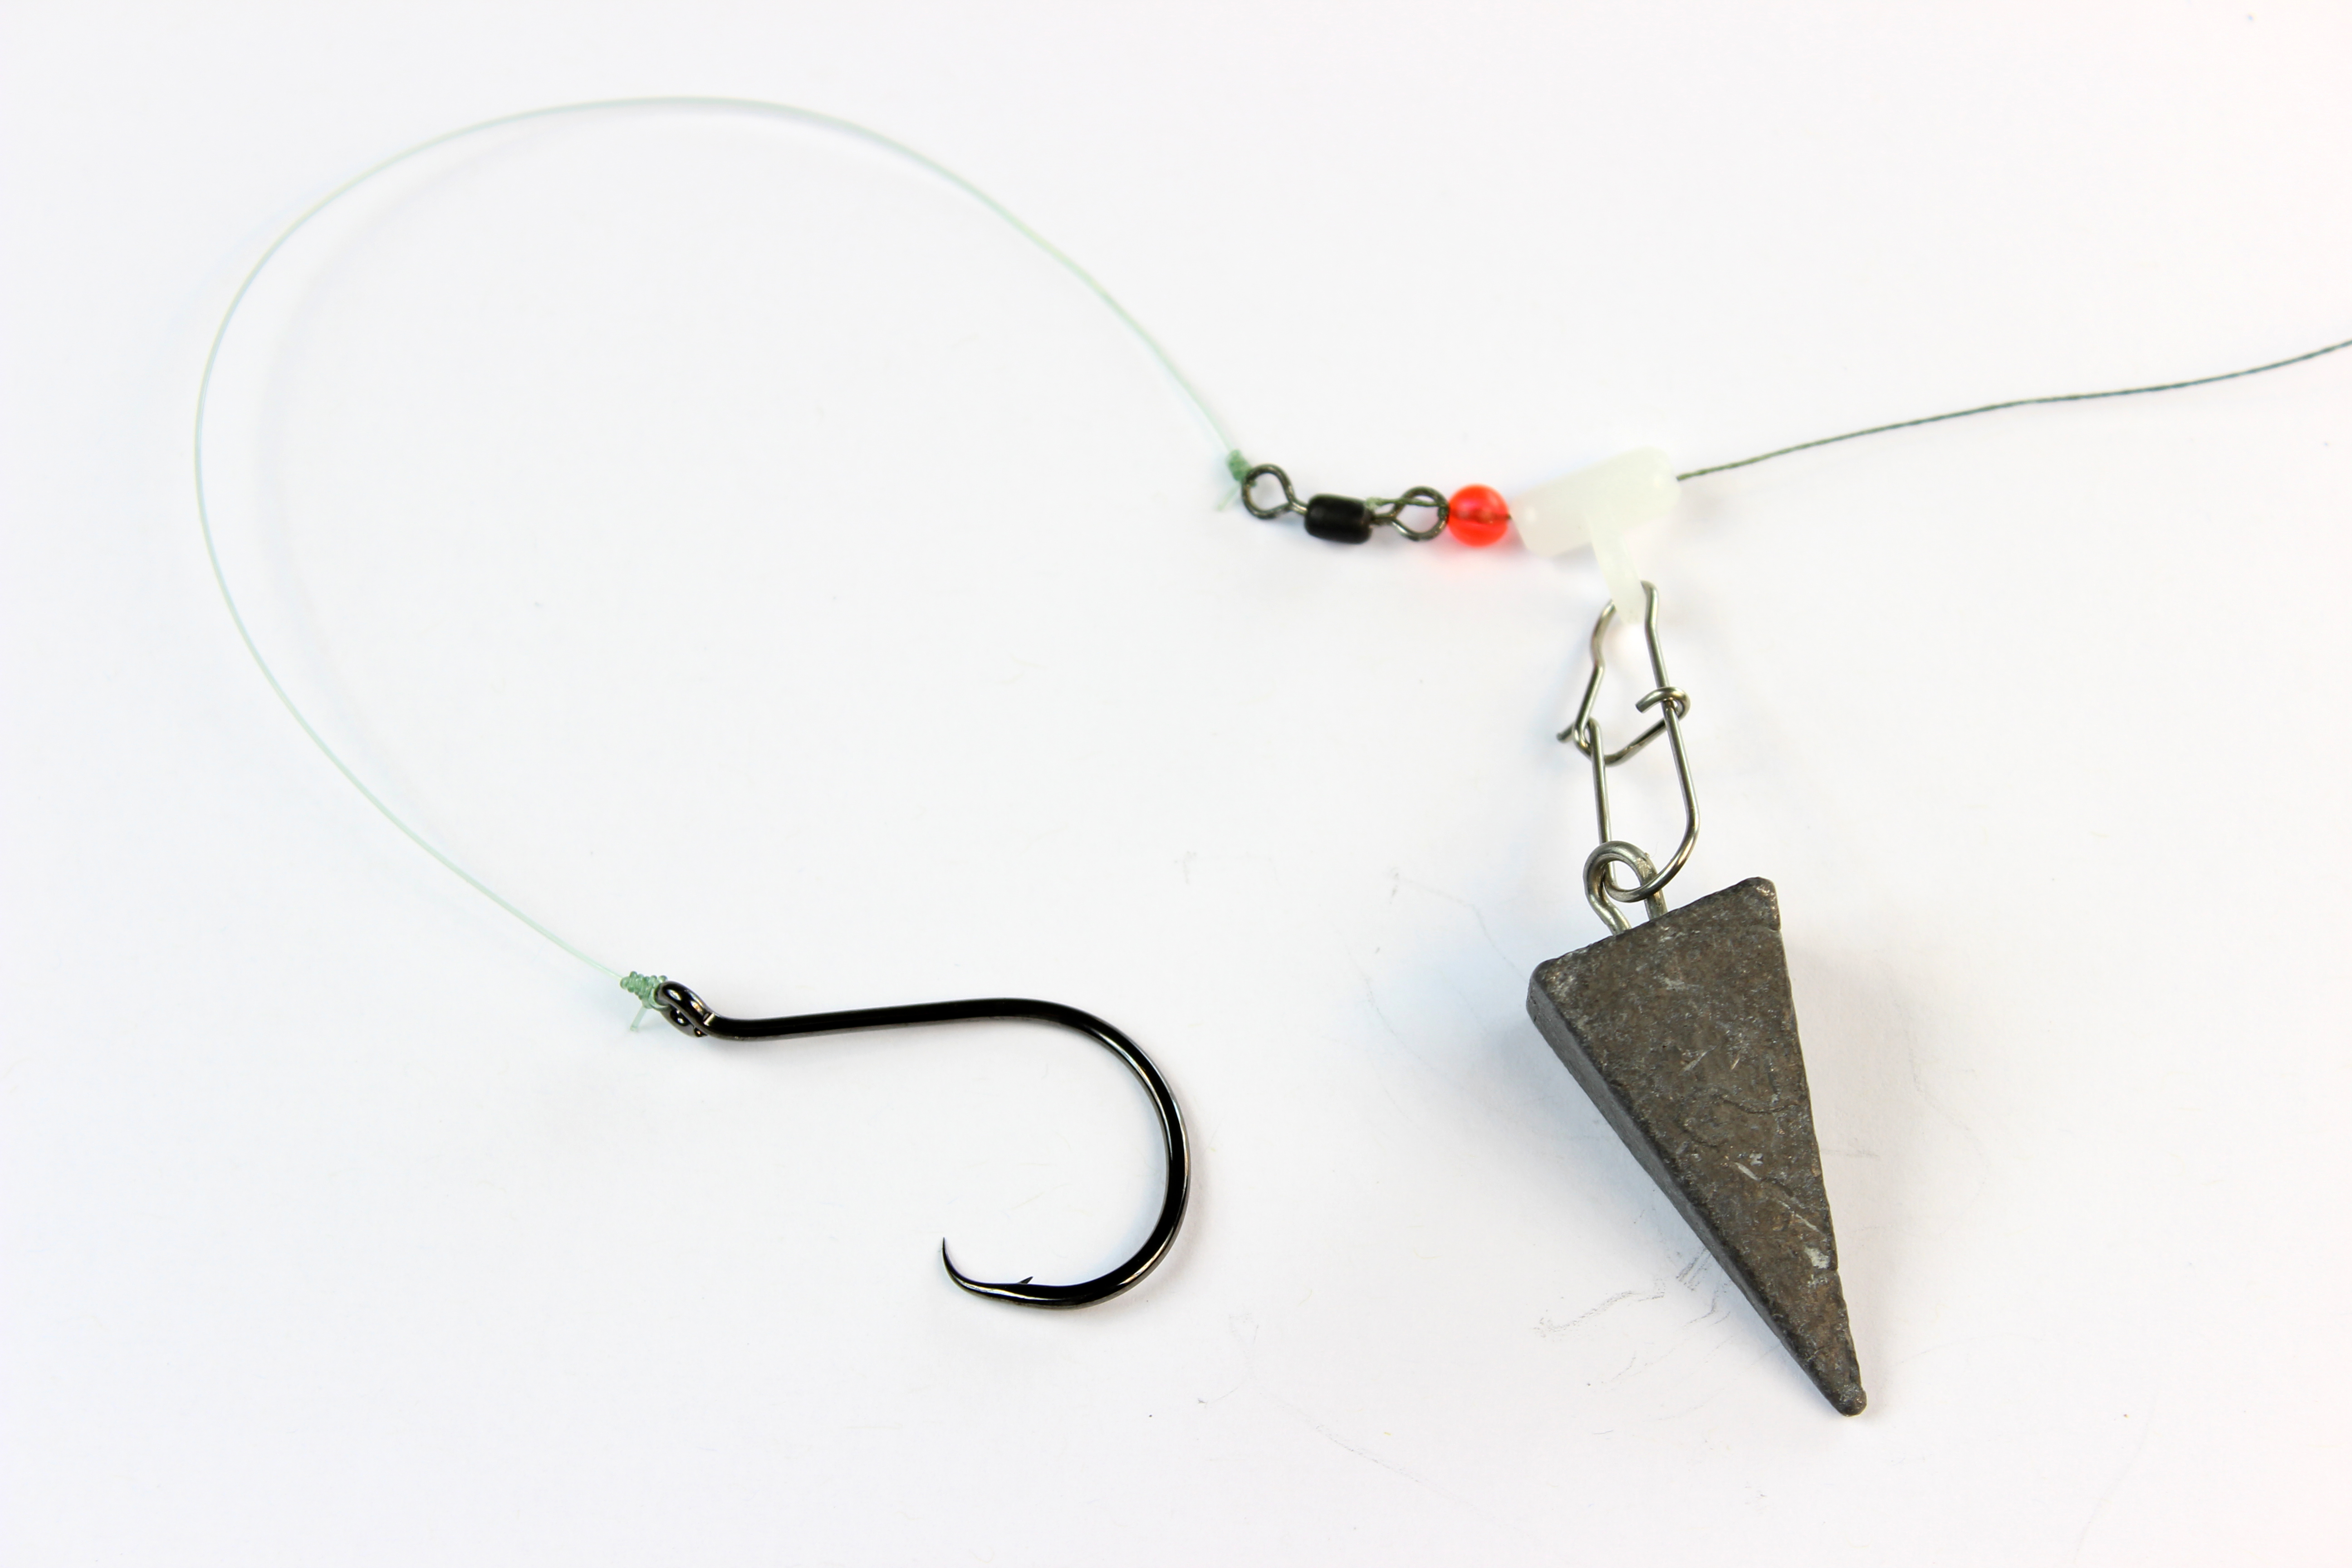 How to Tie a Simple Catfish Rig